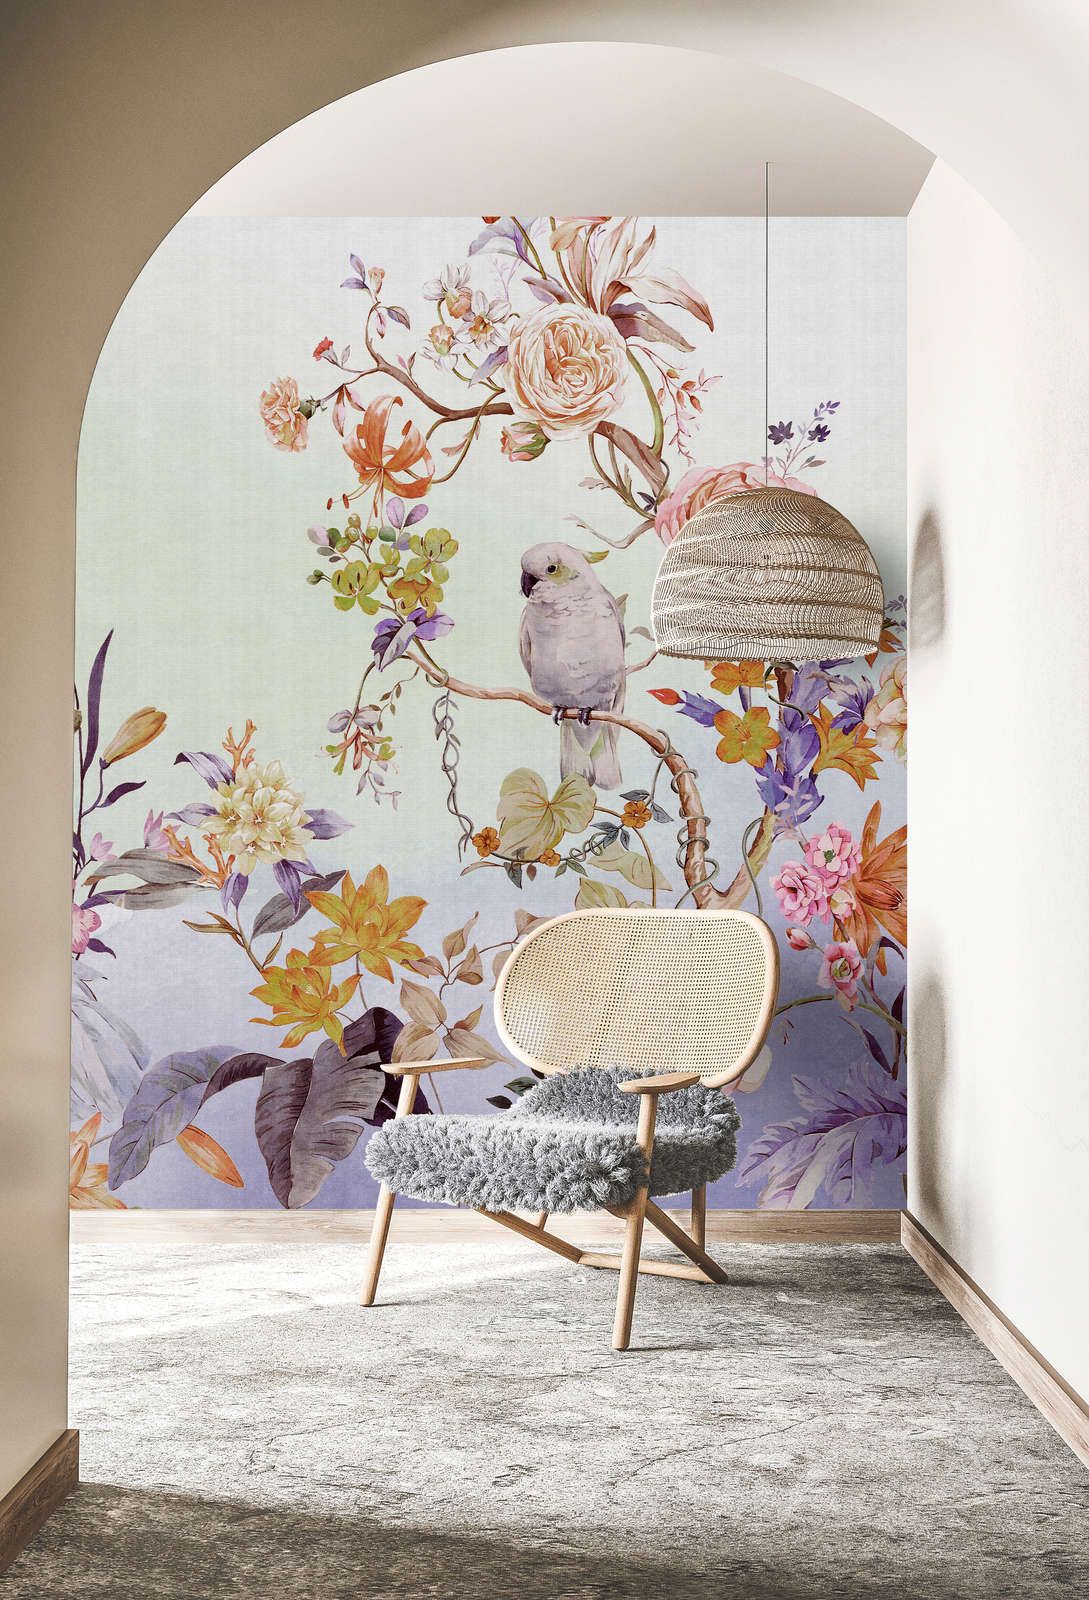             Photo wallpaper »paradise« - Bird & flowers with colour gradient and linen texture in the background - Colourful | Smooth, slightly shiny premium non-woven fabric
        